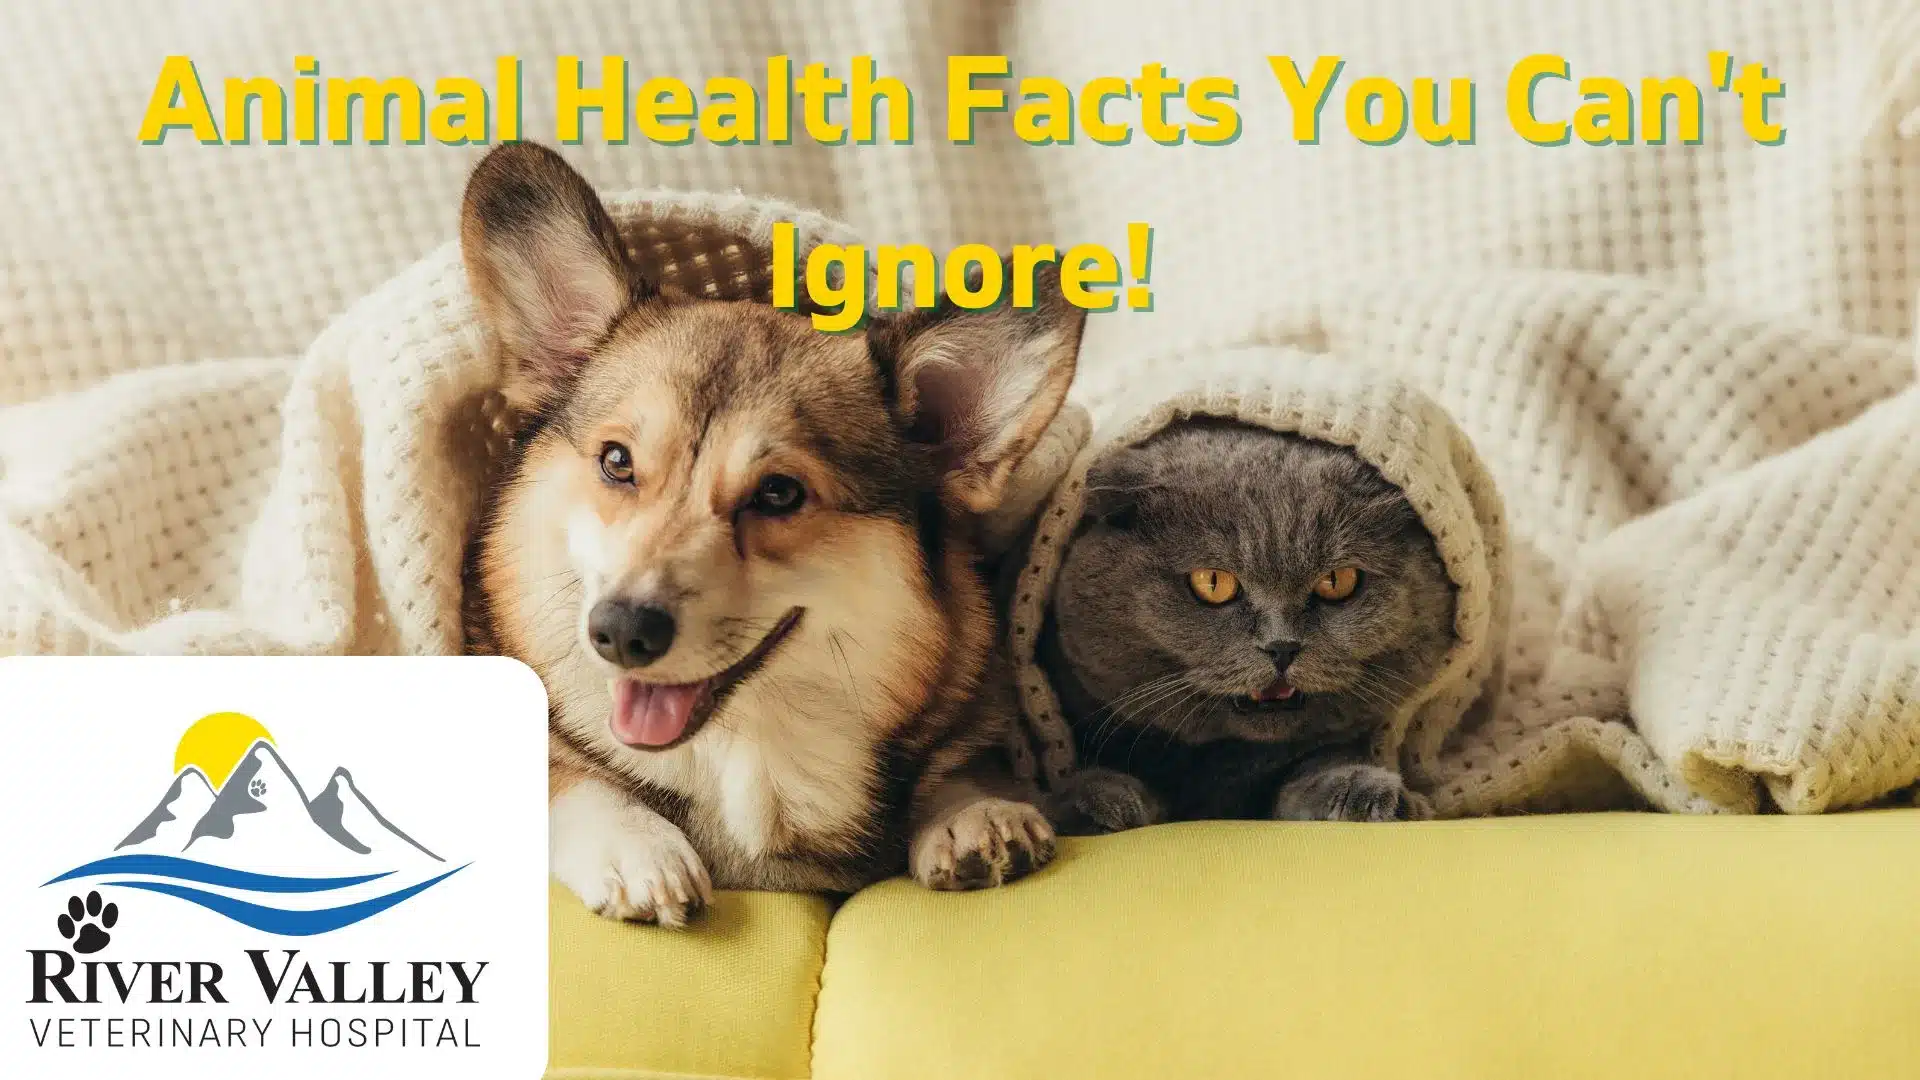 Animal Health Facts You Can't Ignore